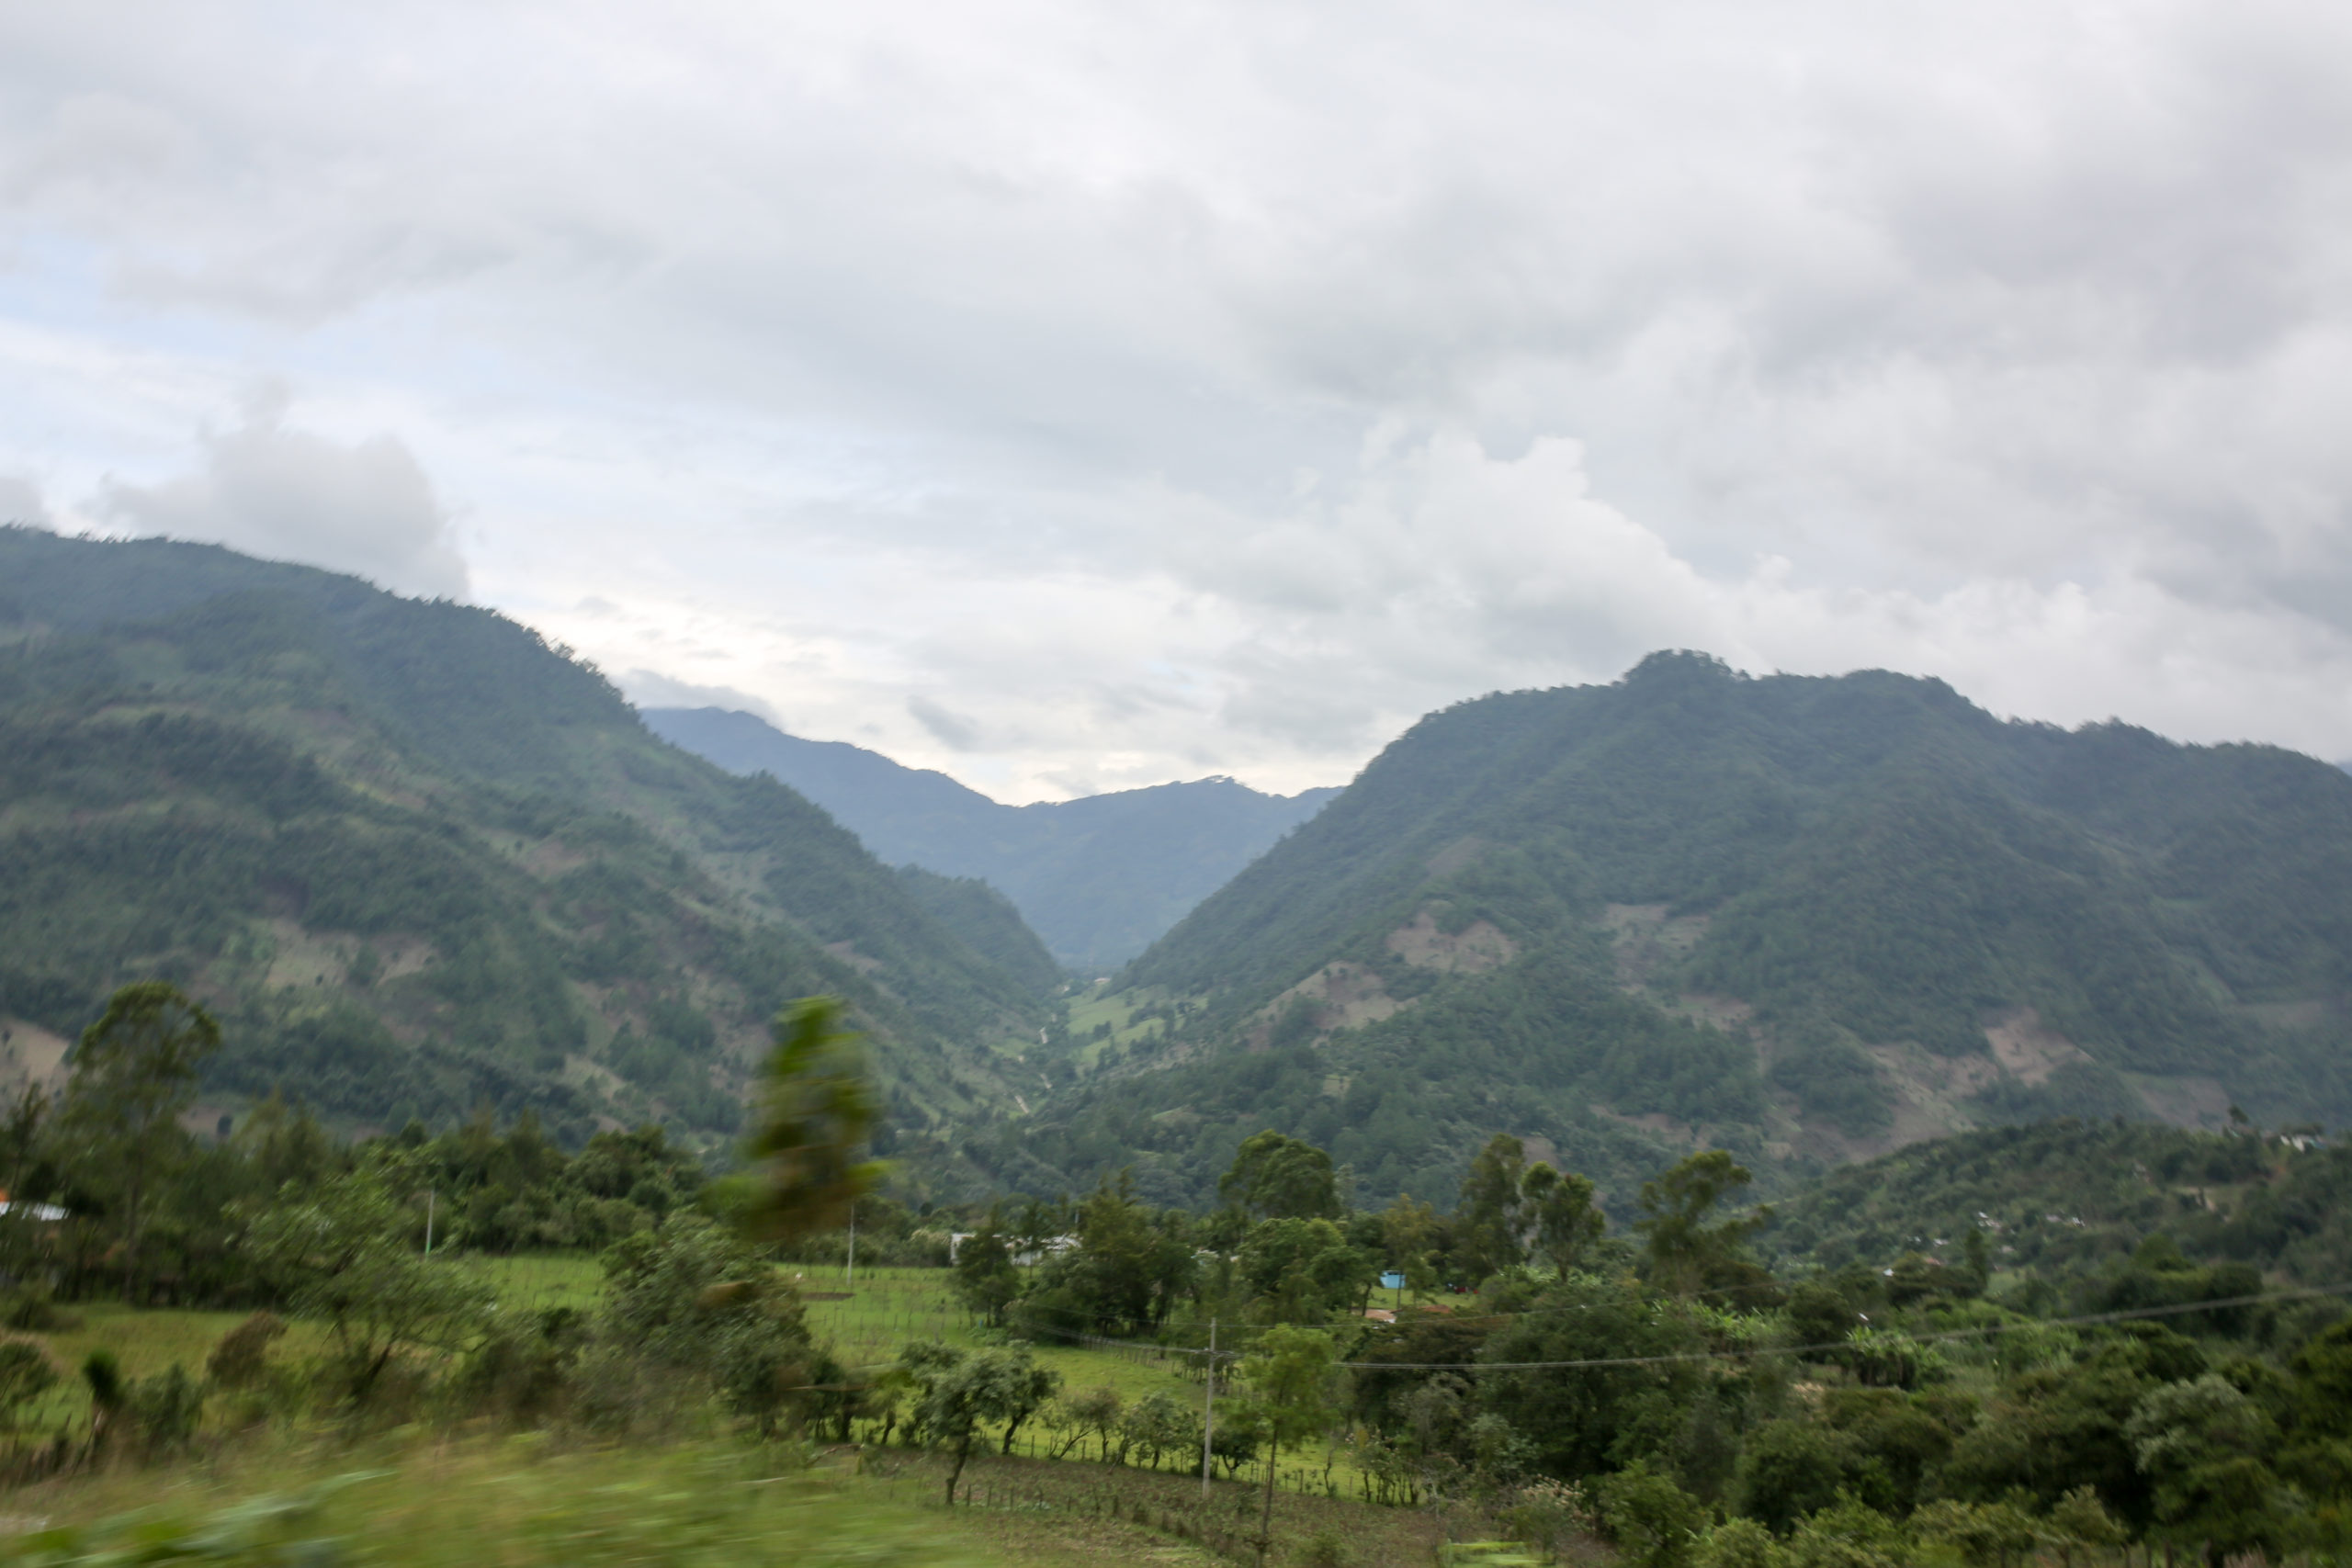 An image of the Guatemalan countryside with mountains in the background